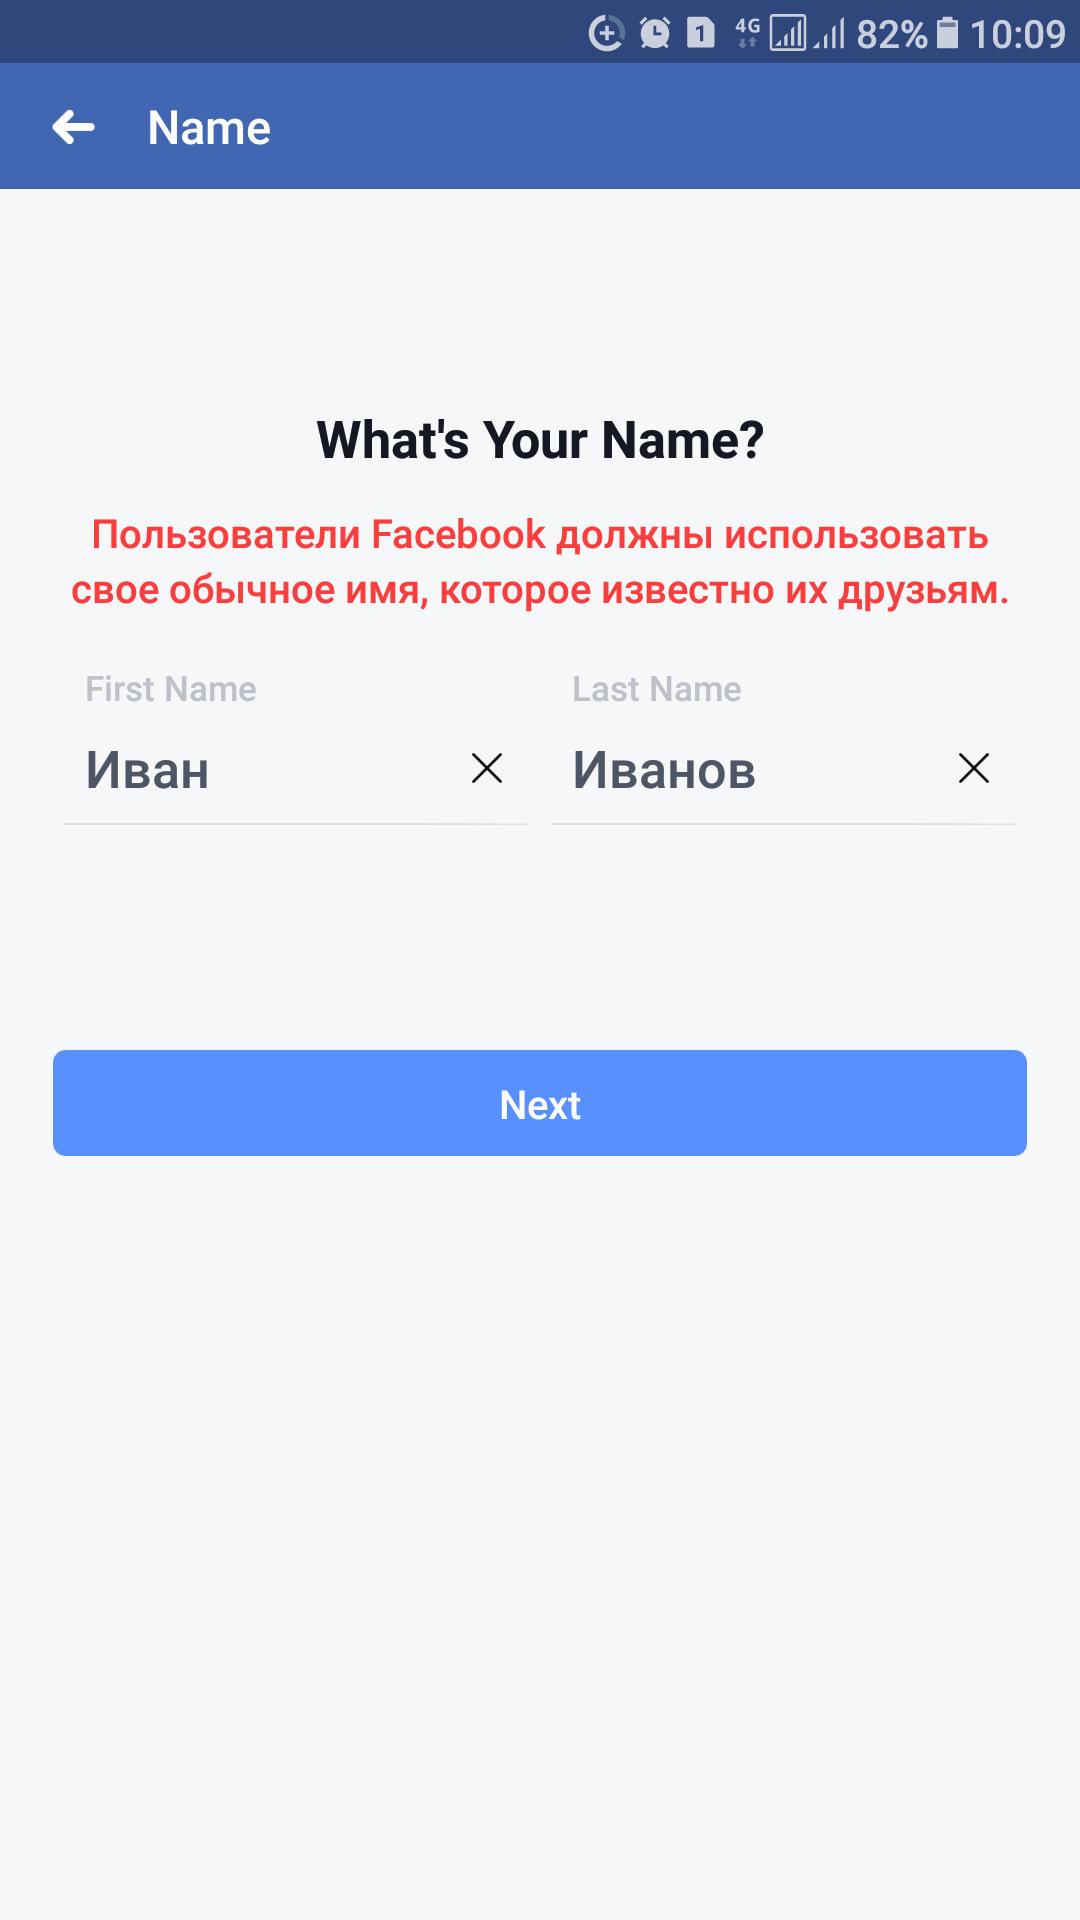 When the mordakniga does not know Russian names. - Screenshot, , Facebook, Discrimination, Russophobia